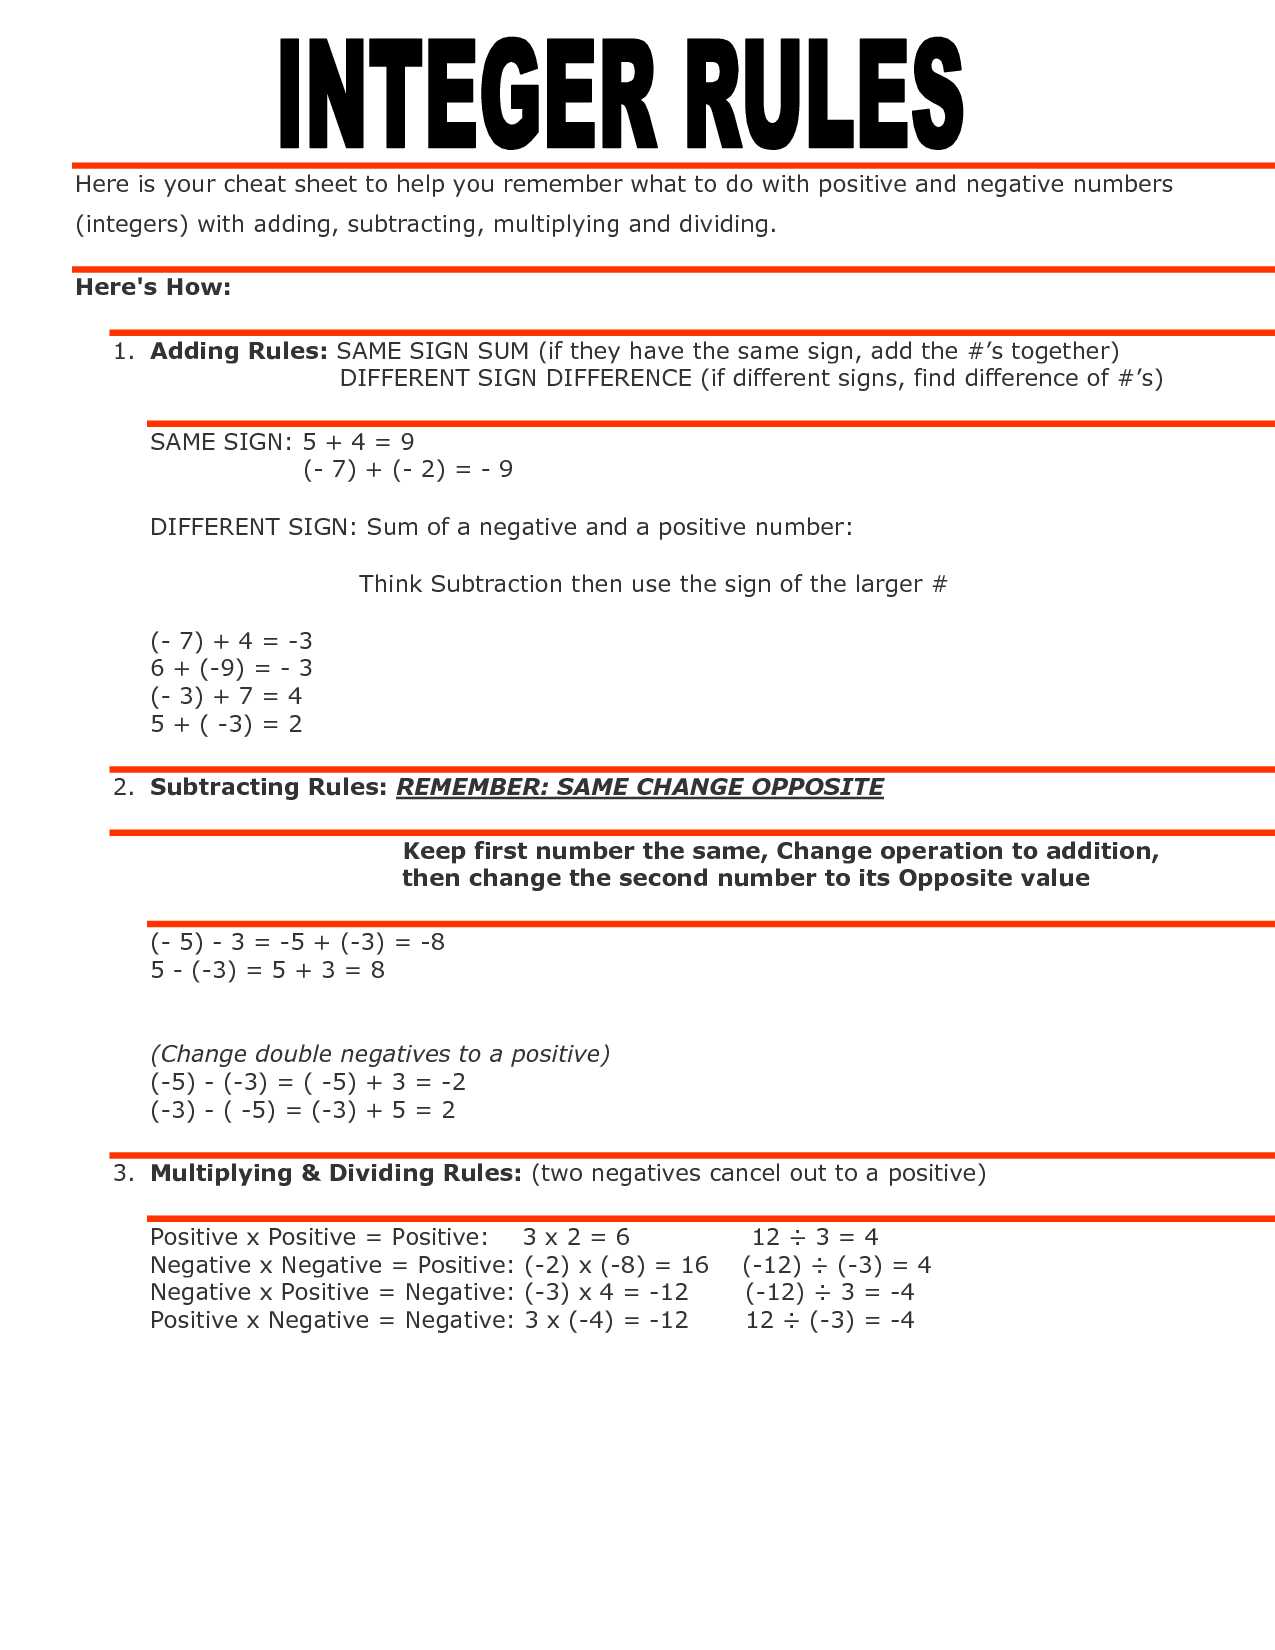 Adding and Subtracting Integers Word Problems Worksheet with Integer Rules Img Docstoccdn Thumborig Png